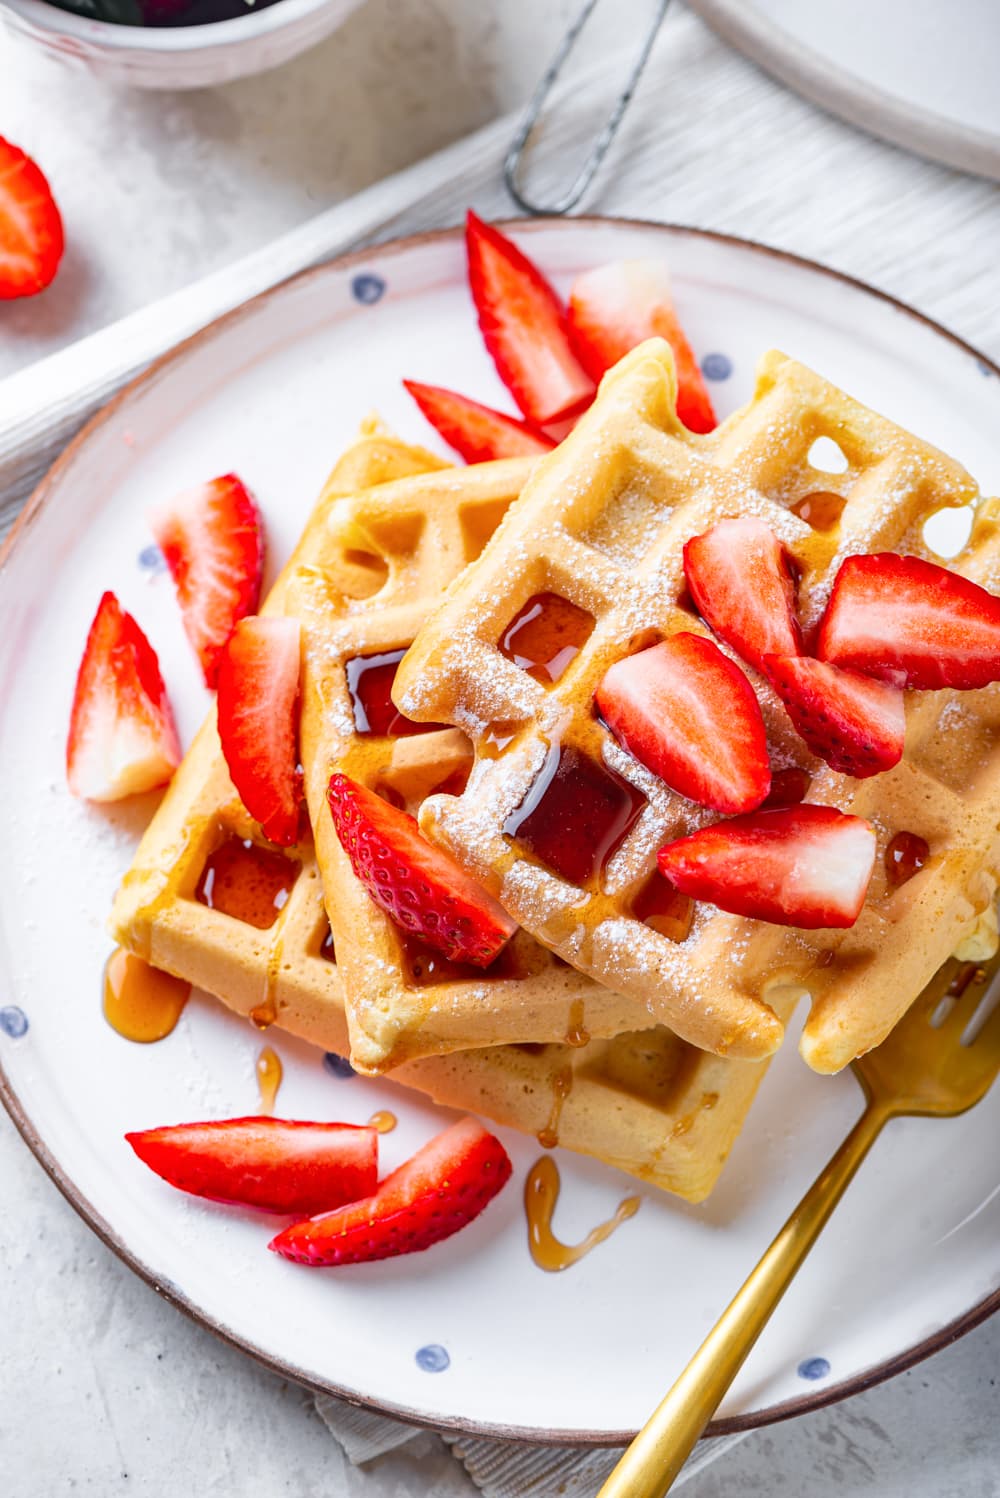 An overhead view of three square vegan waffles unevenly stacked on top of each other with maple syrup and cut up strawberries on them. The waffles are on white plate and there are a few pieces of strawberries on the plate as well. A gold fork is at the front of the plate with the tip of the prongs hidden by the top waffle. The plate is on a tablecloth on a white counter.